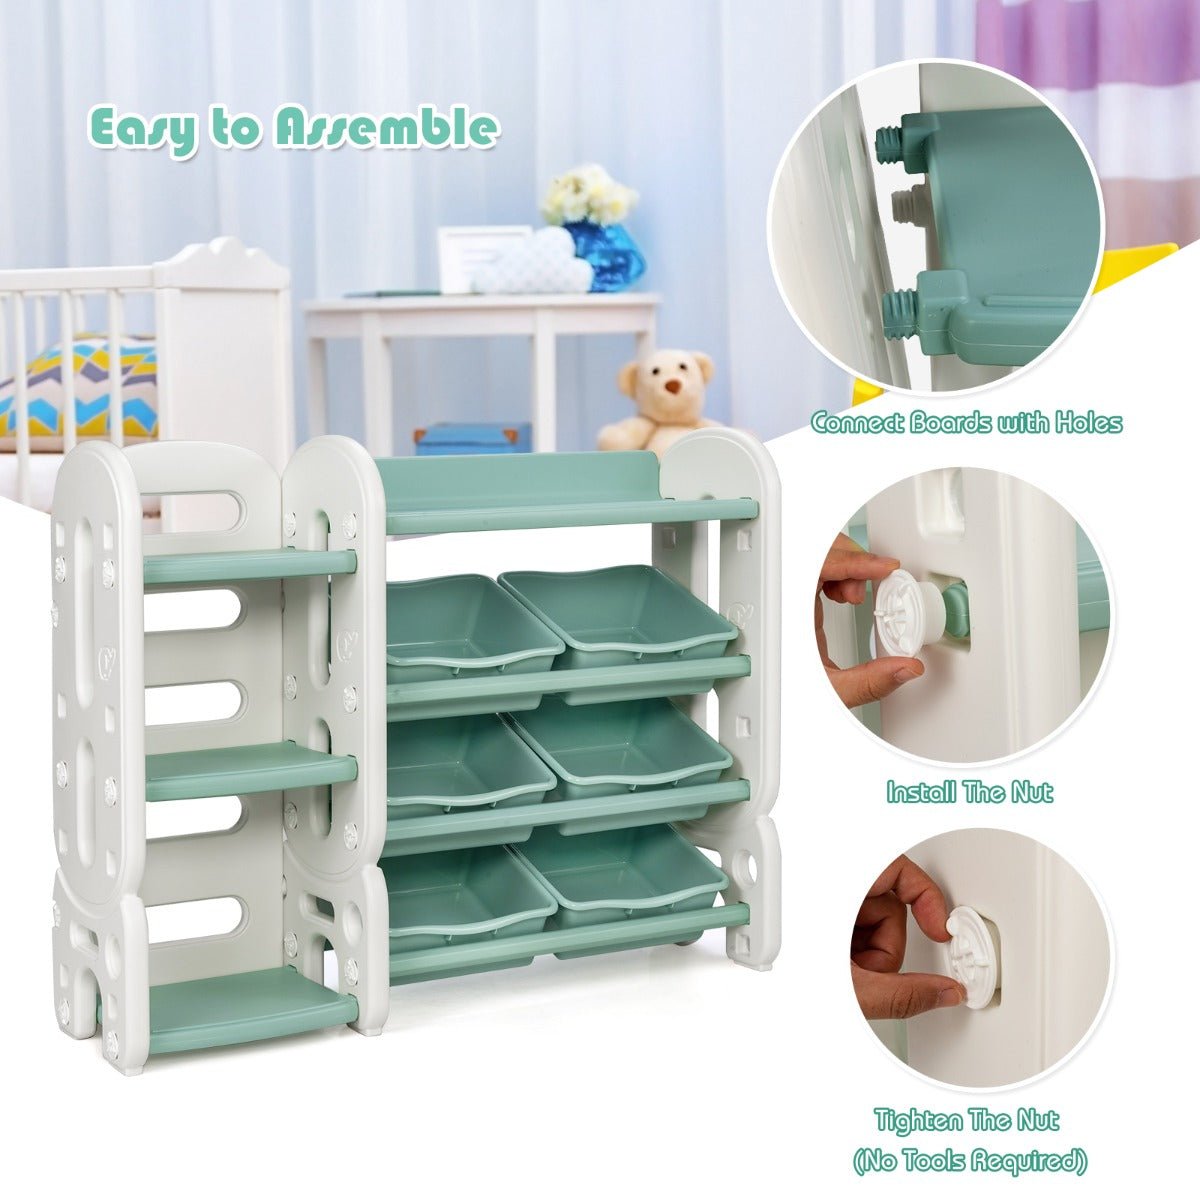 Enhance Bedroom Space with Green Toy Storage Organizer and Bookshelf